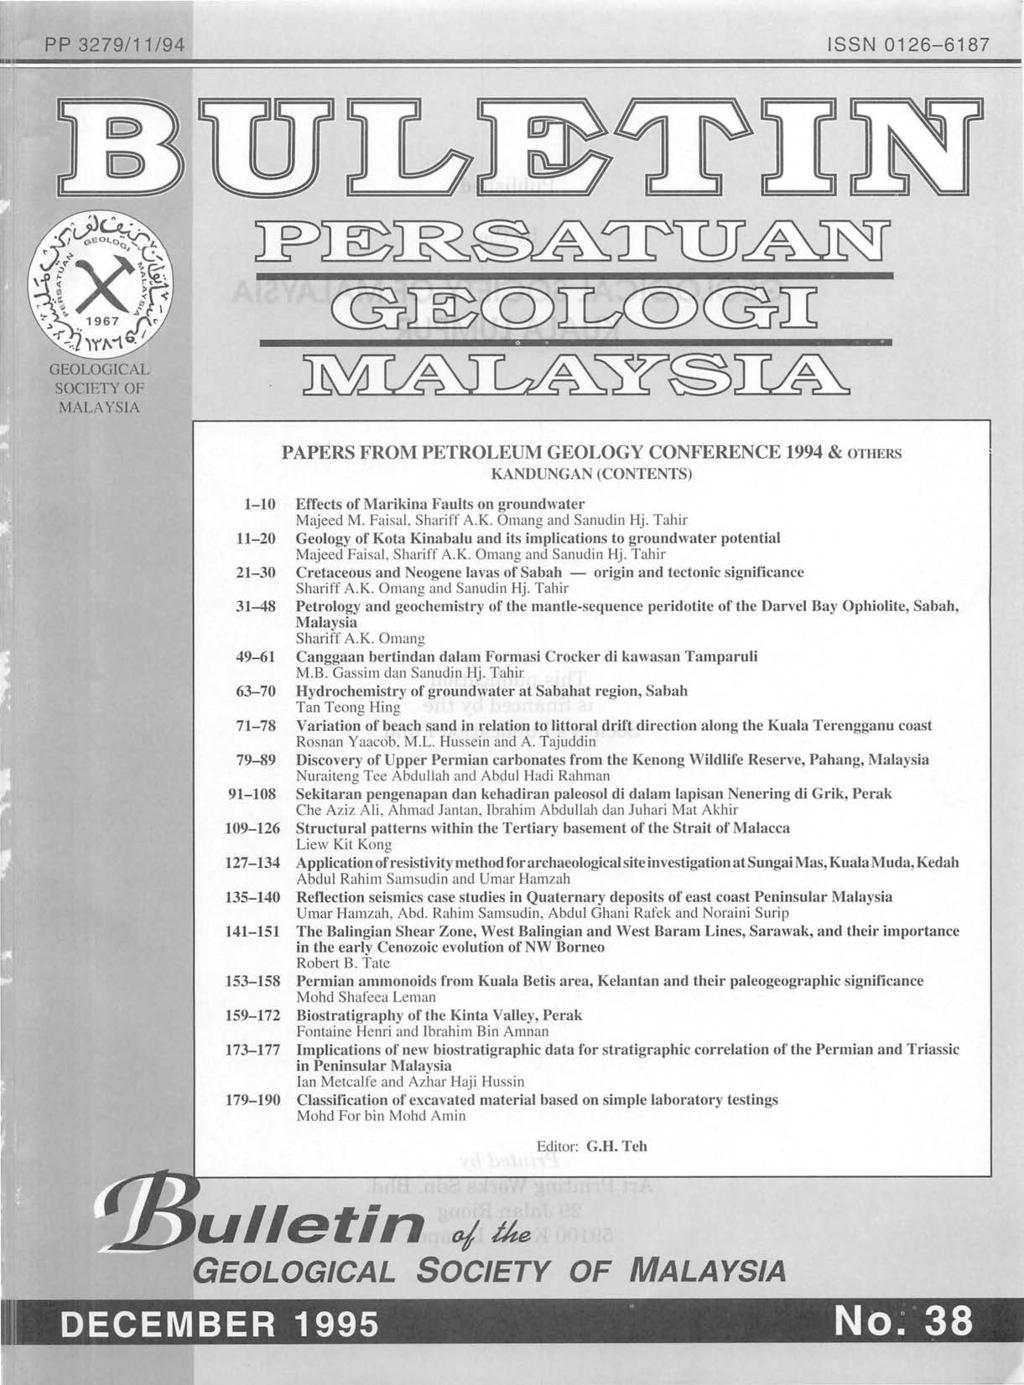 PP 3279/11/94 ISSN 0126-6187 IP~~~'IrlDT~ @~CQ)IL(Q)@TI GEOLOGICAL SOC1ETY OF MALAYSIA PAPERS FROM PETROLEUM GEOLOGY CONFERENCE 1994 & OTHERS KANDUNGAN (CONTENTS) 1-10 Efl'ects of Marikina Faults on